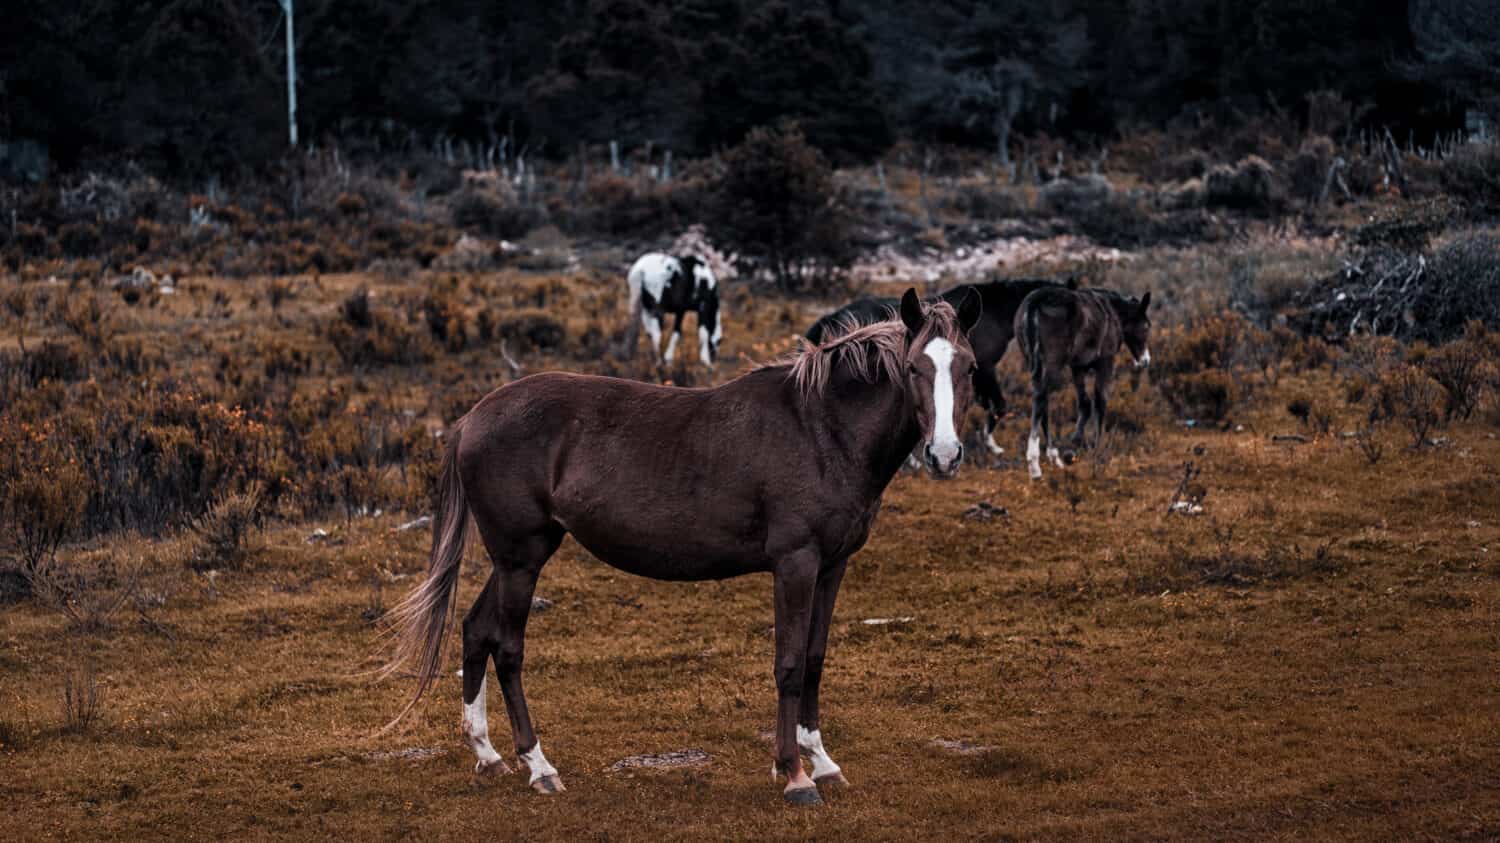 Brown Wild Horse of Galiceno Breed is Posing in The Mountains in Mexico. He is posing like a proper model. This is what I love about wildlife and nature in Mexico it is just you and free wild horses.